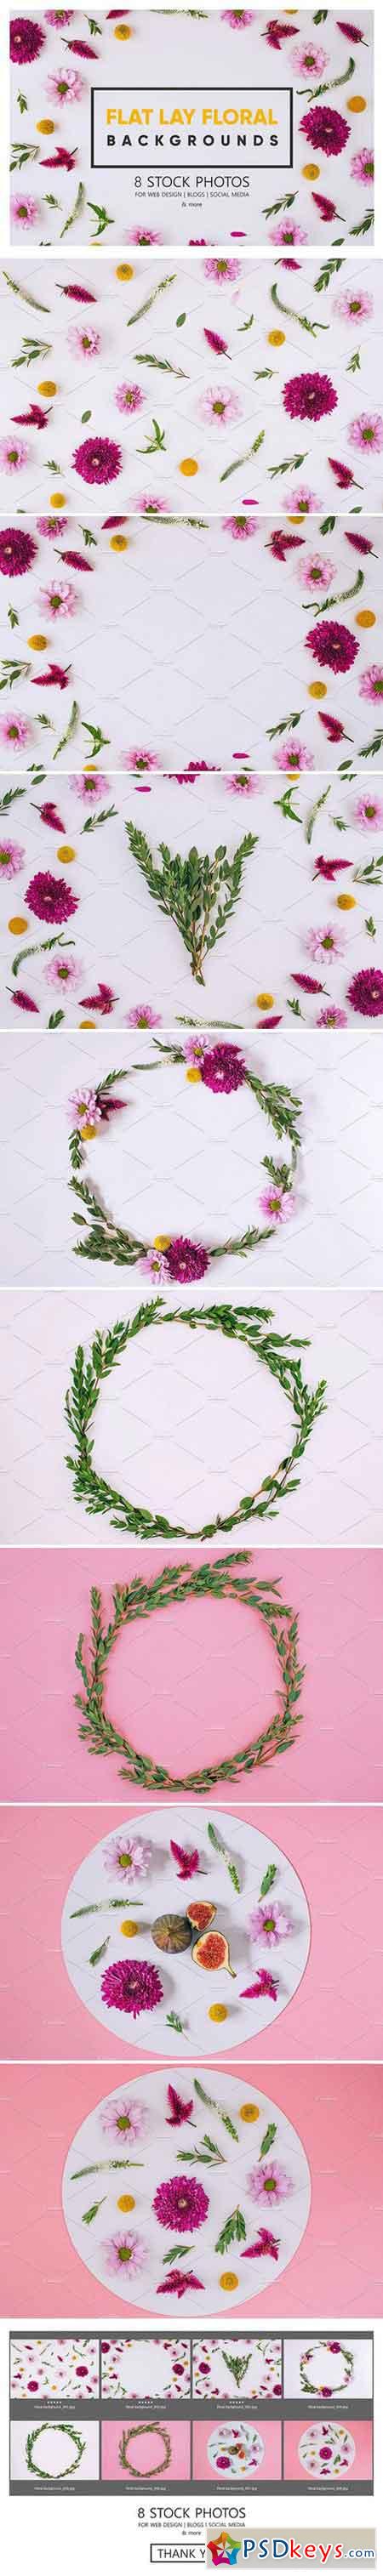 Flat lay floral Stock Photo 1815600